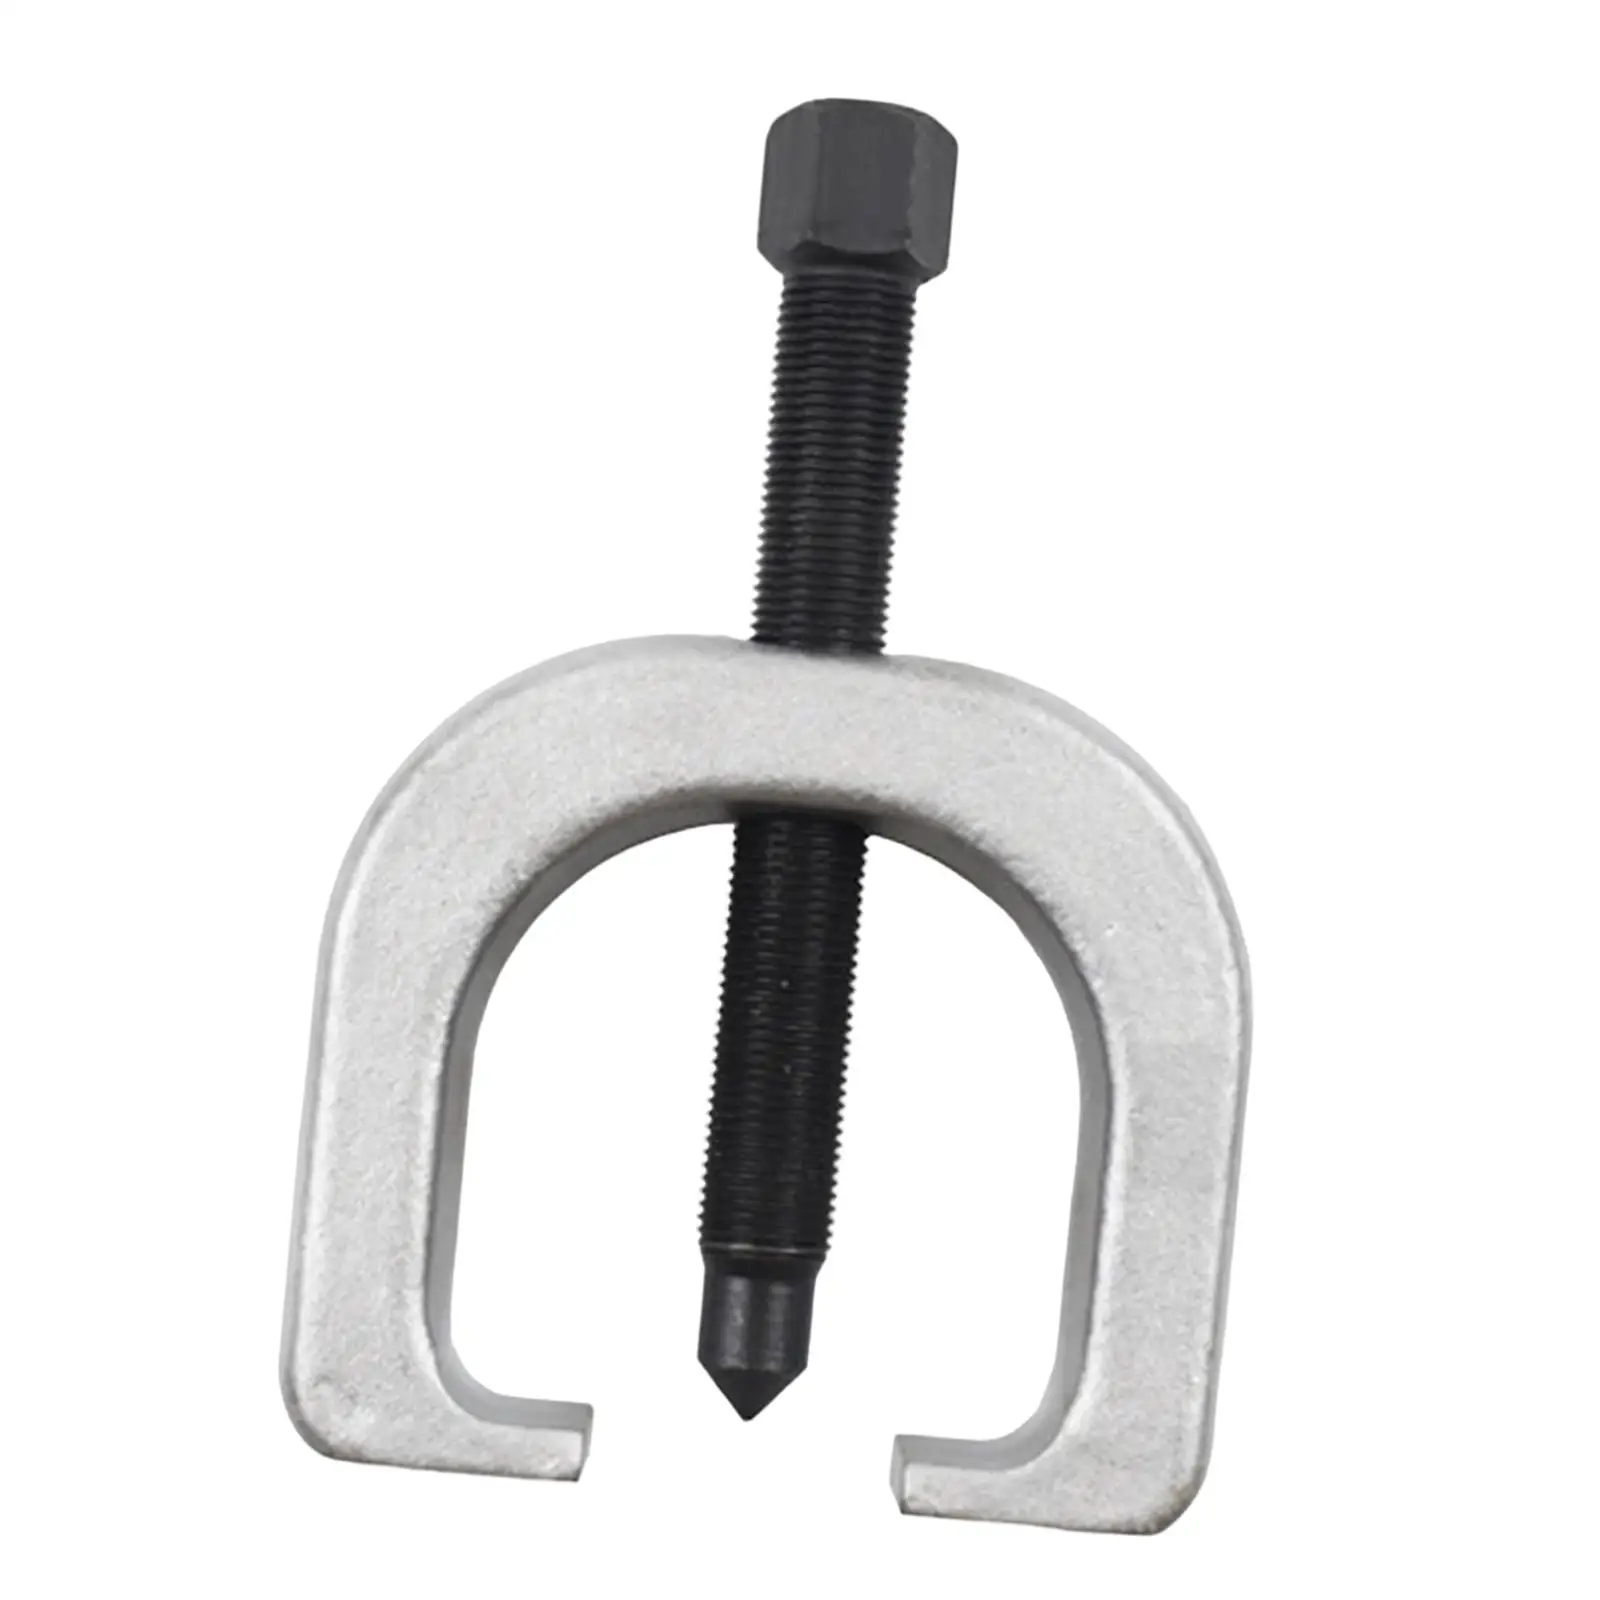 Slack Adjuster Puller High Performance Sturdy Carbon Steel Maintenance Tool Removal Tool for Trailers Trucks